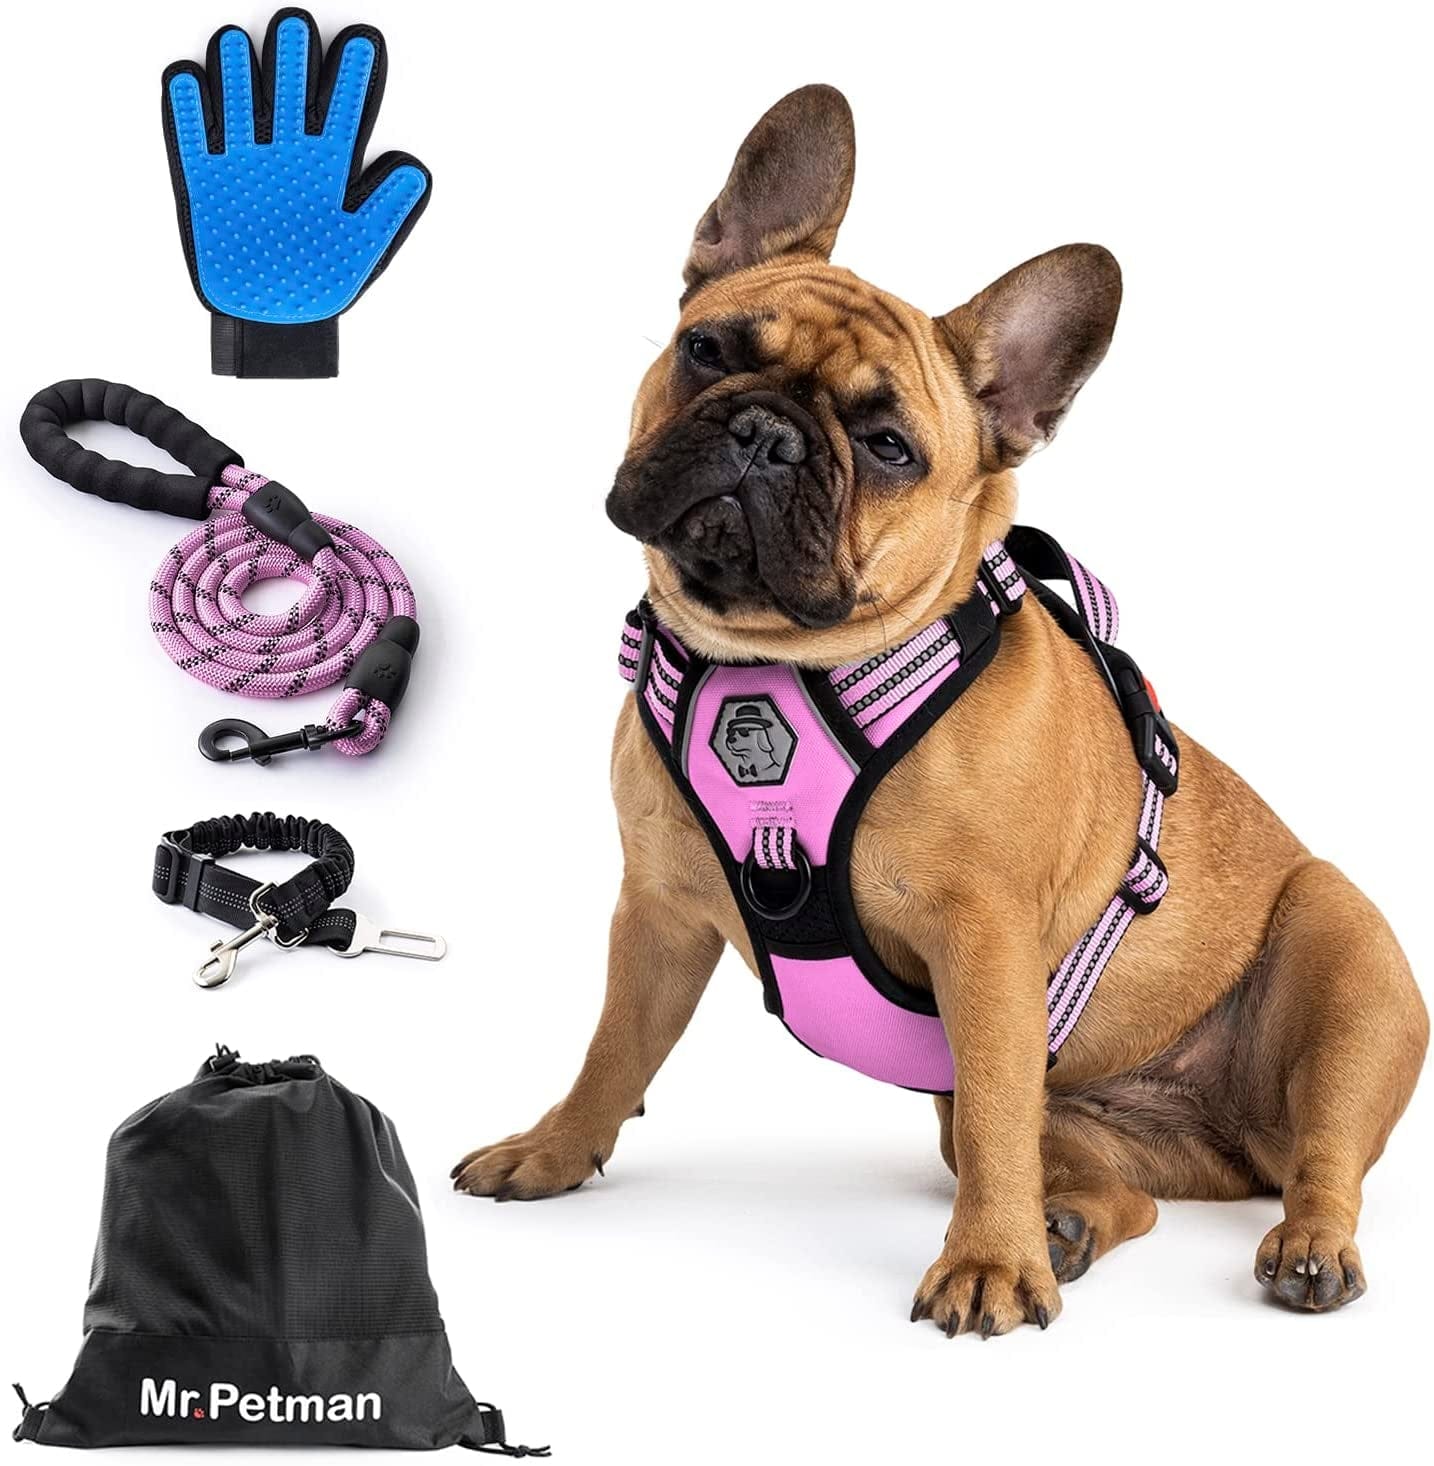 MR. PETMAN No Pull Dog Harness with Leash, Seat Belt, Grooming Glove - No Choke Dog Harness Set for Small Medium Large Dogs- Reflective Adjustable Dog Vest Harnesses with Handle for Walking Training Animals & Pet Supplies > Pet Supplies > Dog Supplies > Dog Apparel Mr. Petman Baby Pink Medium 